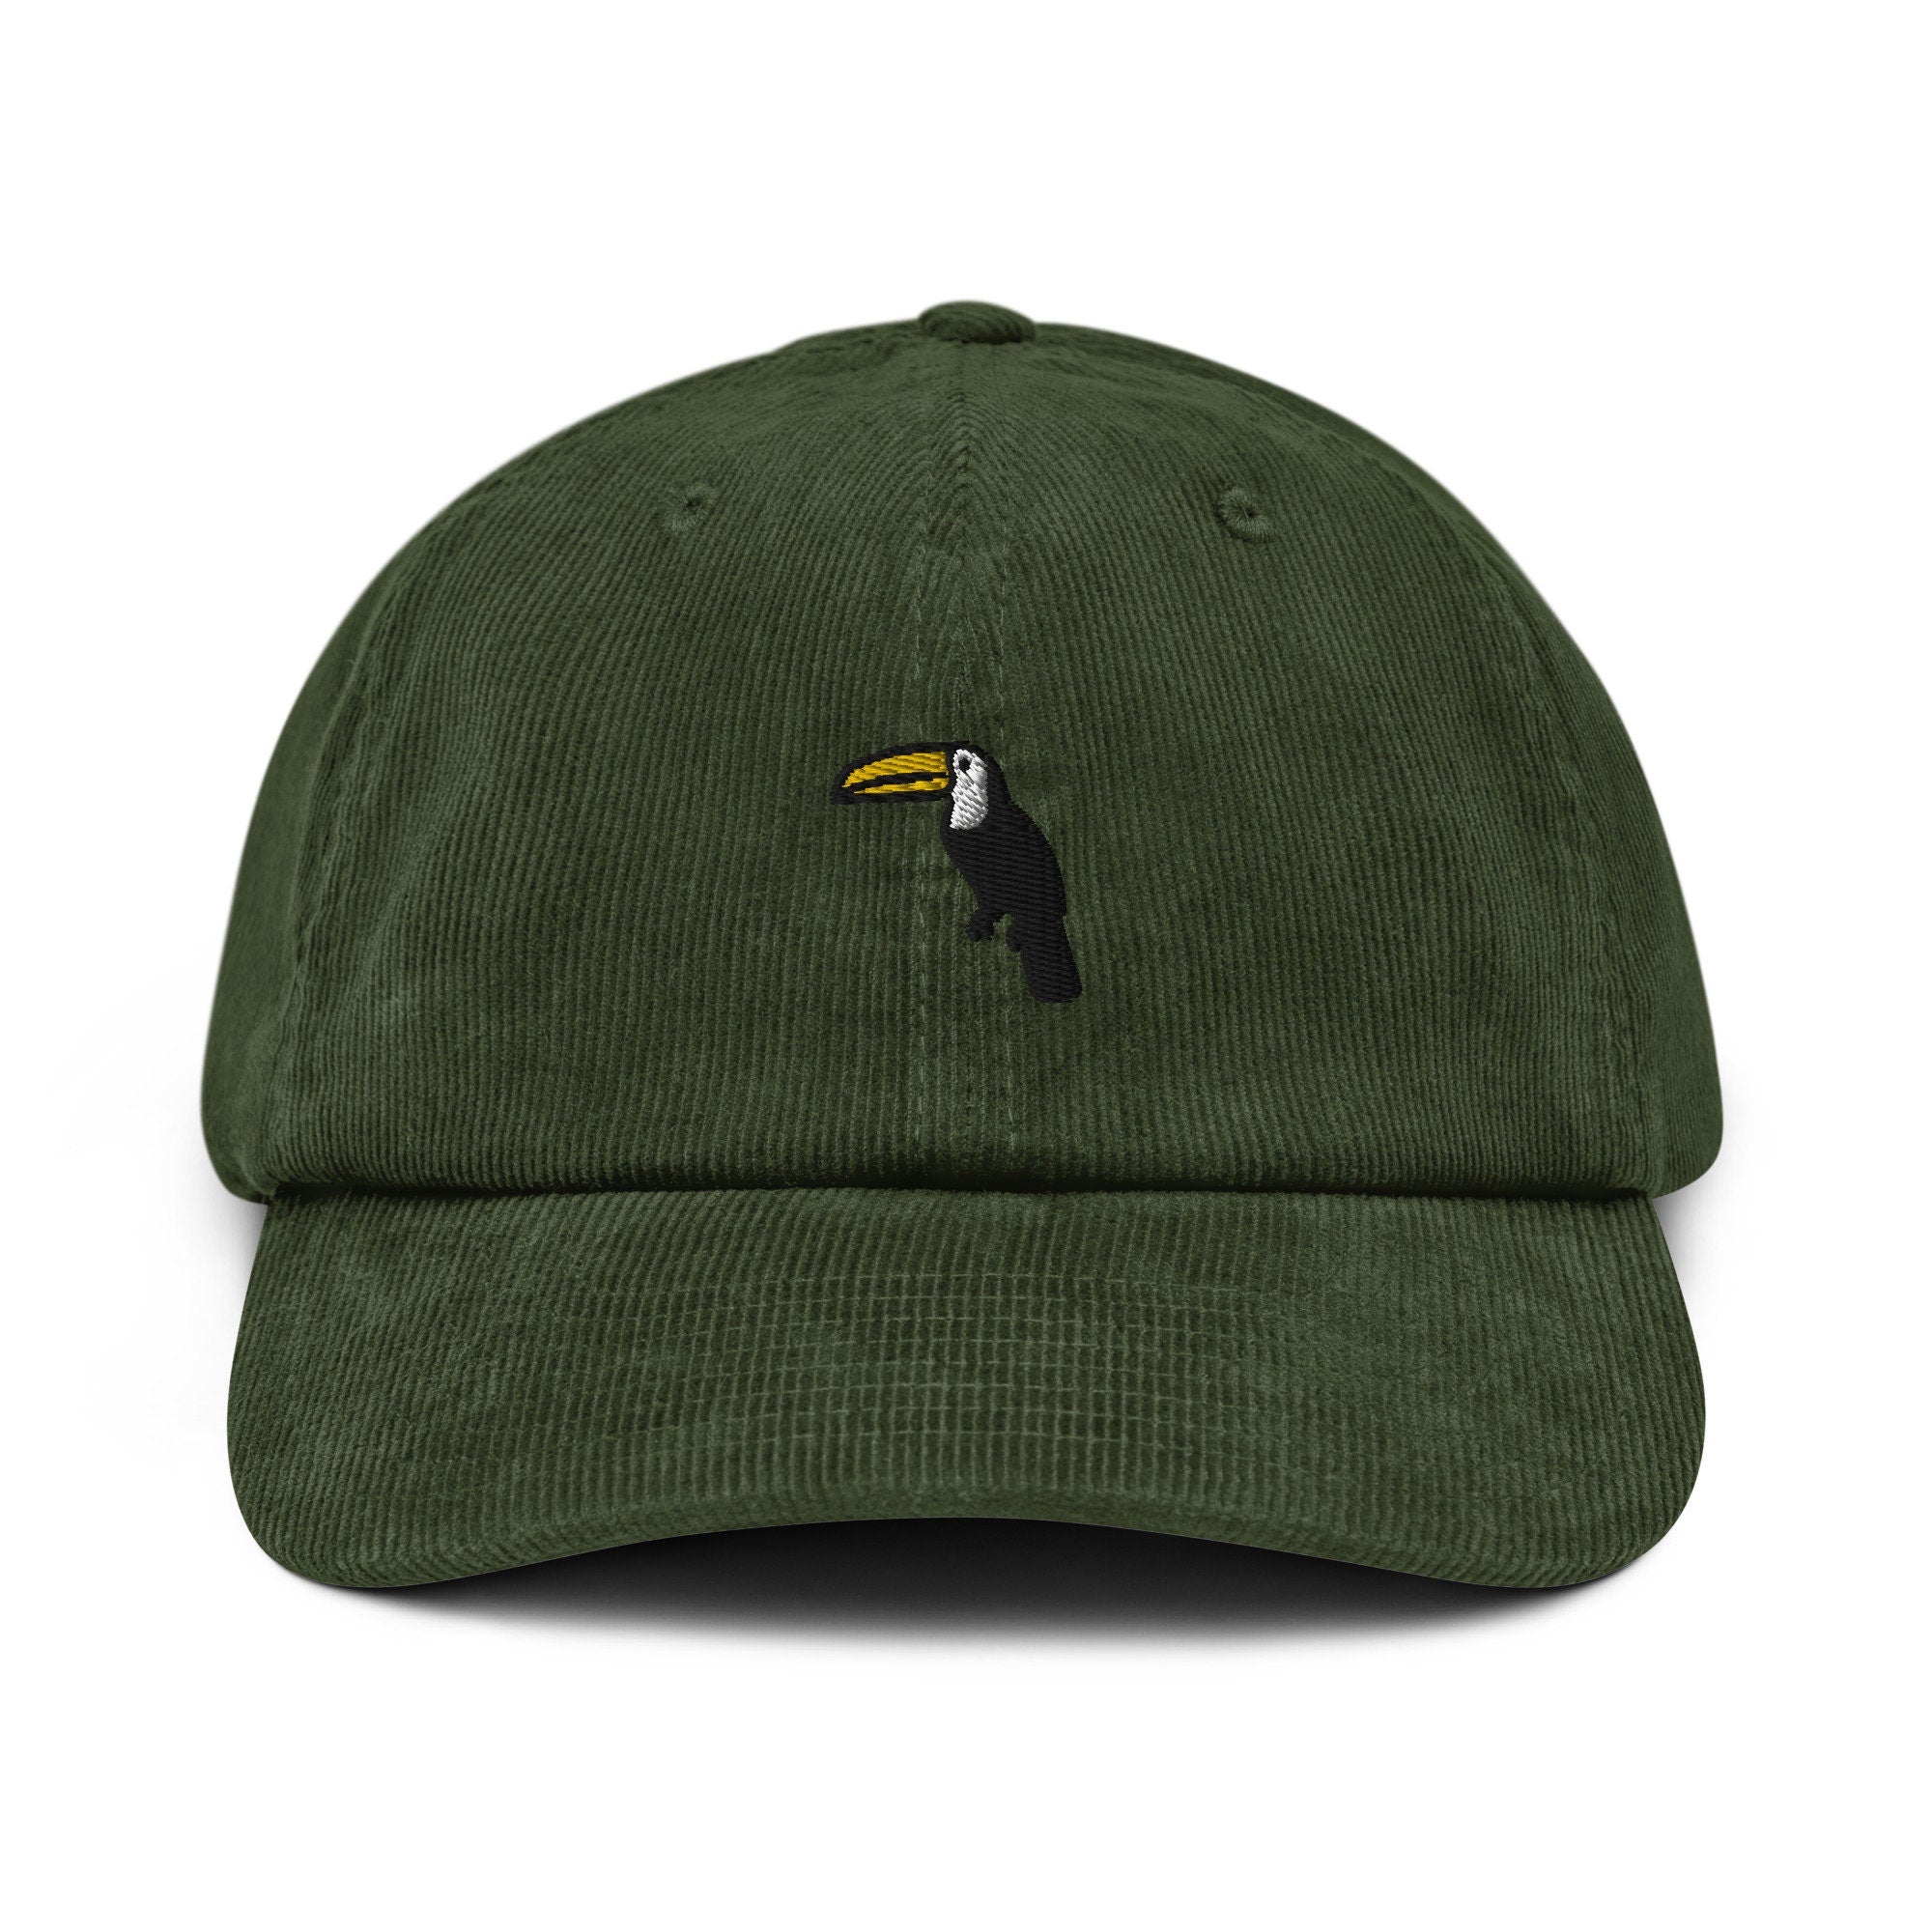 Toucan Corduroy Hat, Handmade Embroidered Corduroy Dad Cap - Multiple Colors